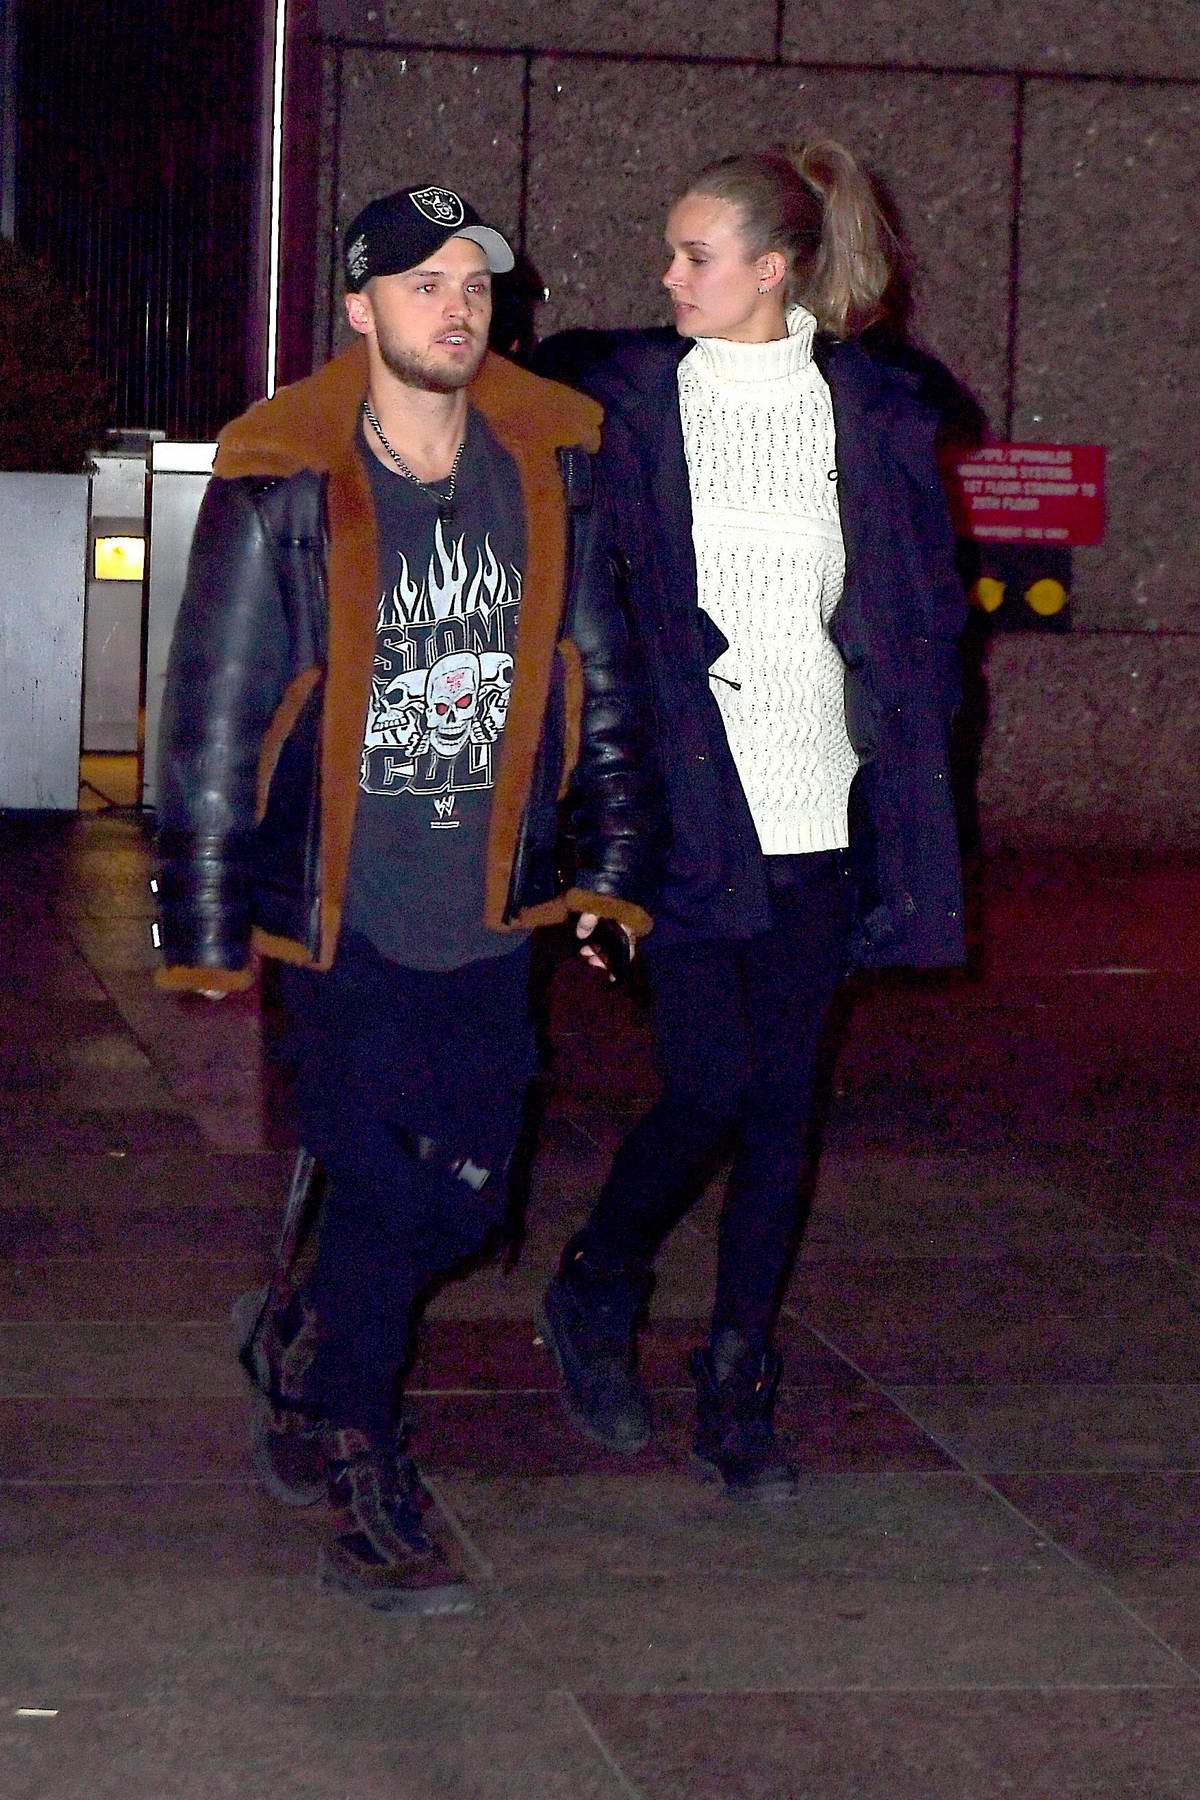 josephine-skriver-and-fiance-bohnes-steps-out-for-a-night-out-in-new-york-city-140119_5.jpg